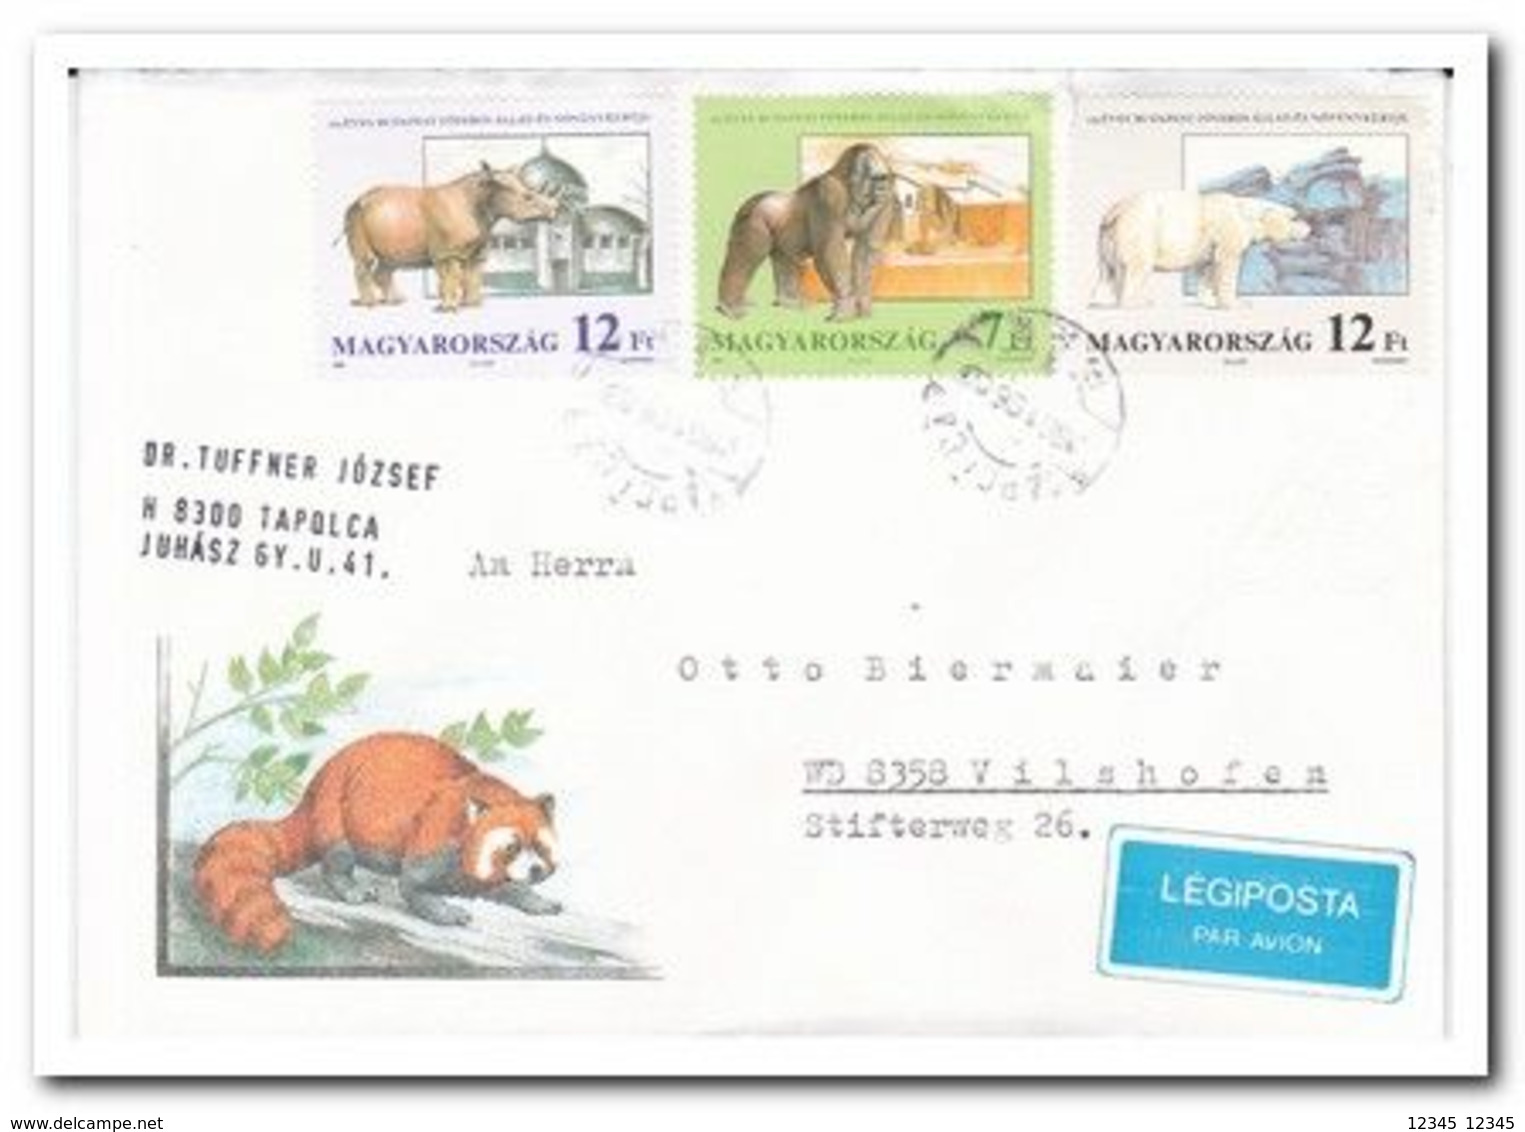 1991, 2 Letters From Tapolca To Vilshofen Germany - Storia Postale